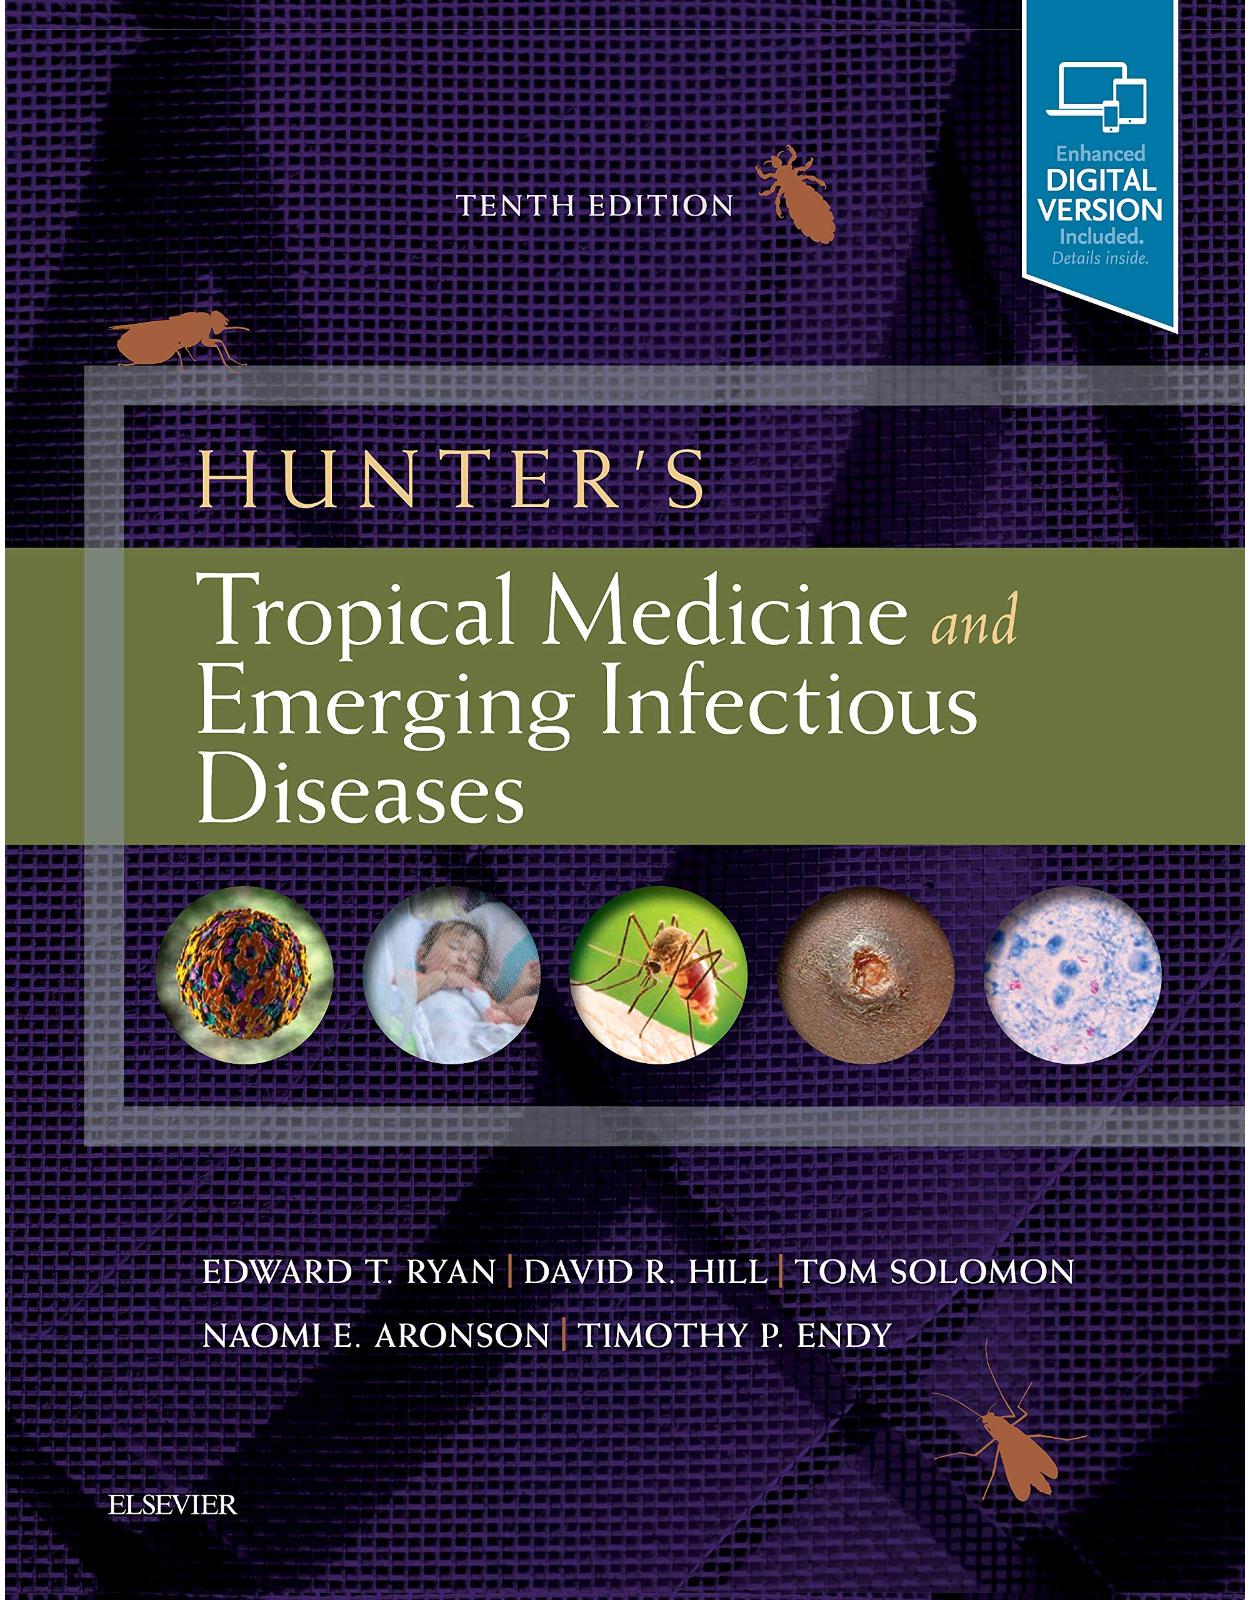 Hunter's Tropical Medicine and Emerging Infectious Disease, 10e: Expert Consult - Online and Print